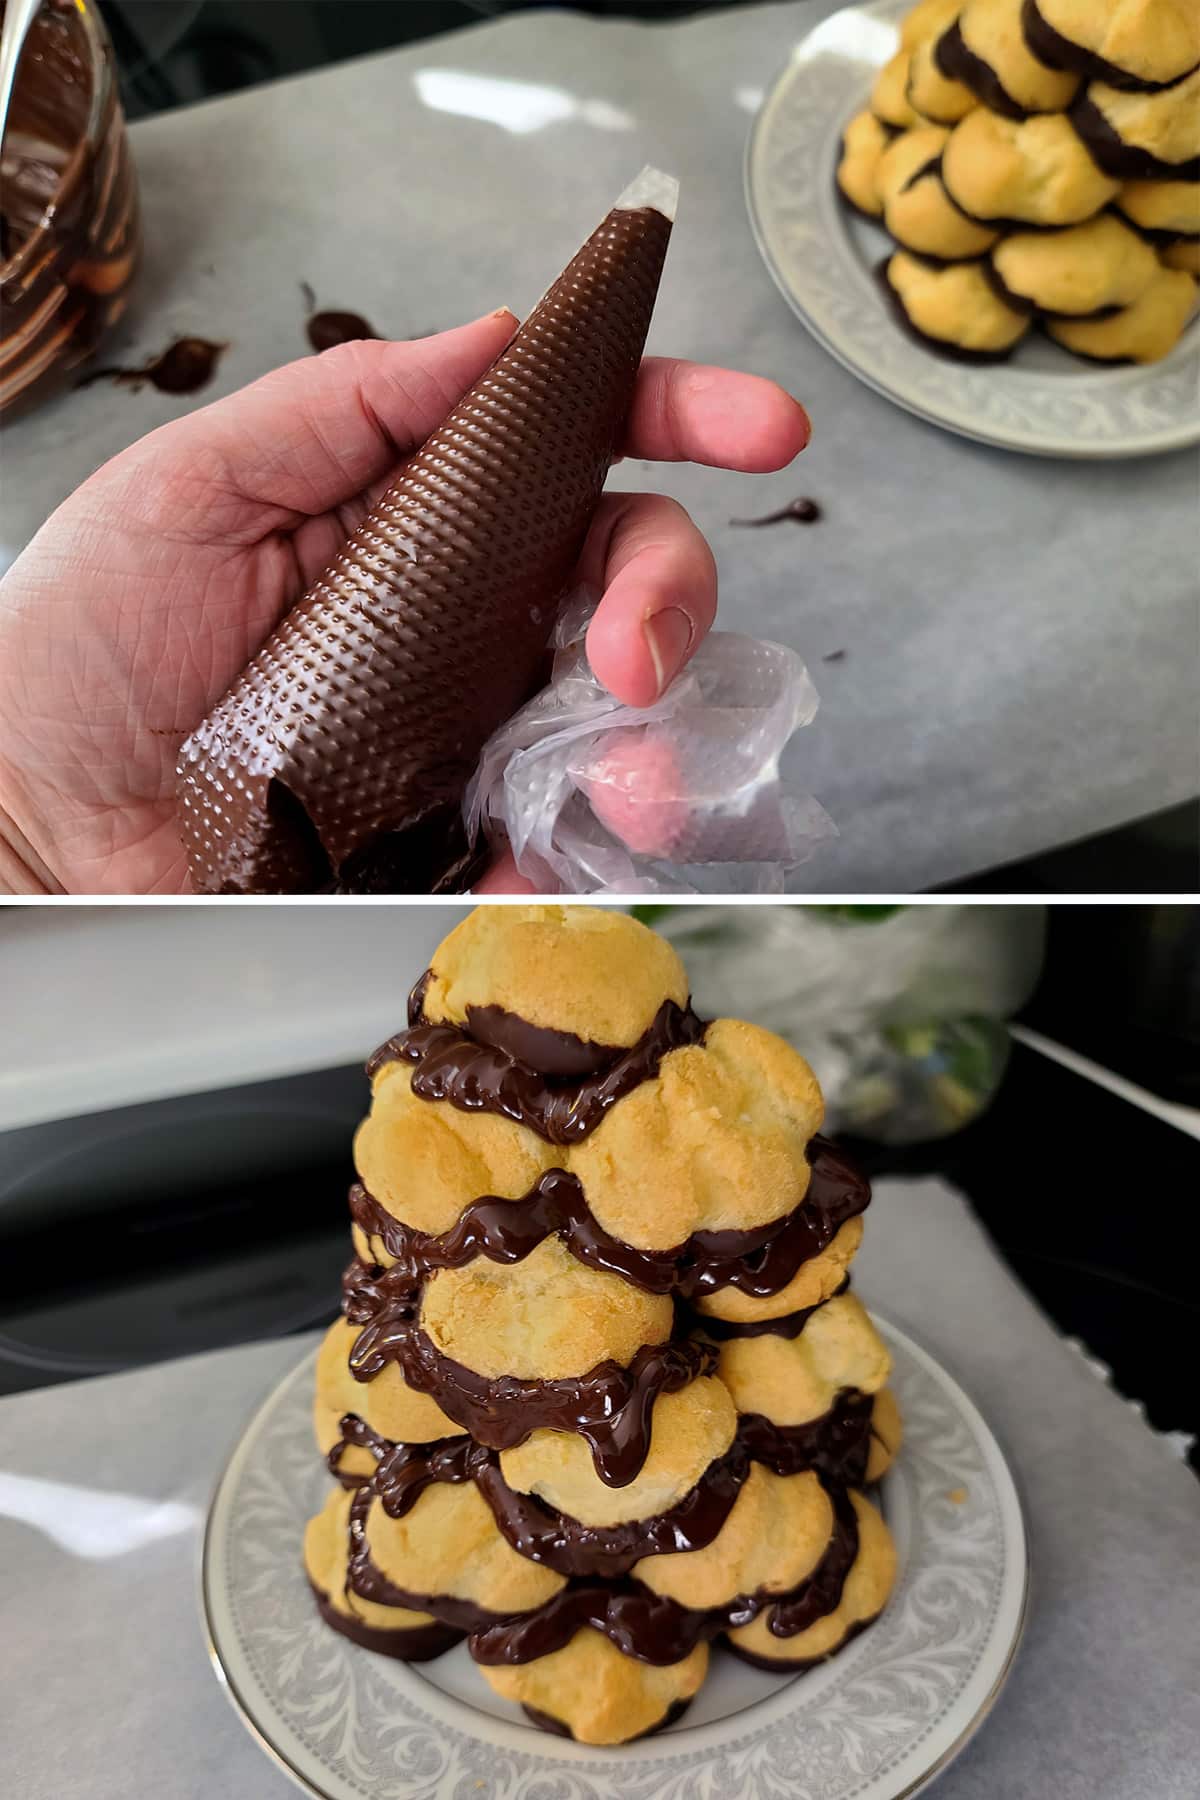 Melted chocolate in a pastry bag beiing piped onto the croquembouche as accent.